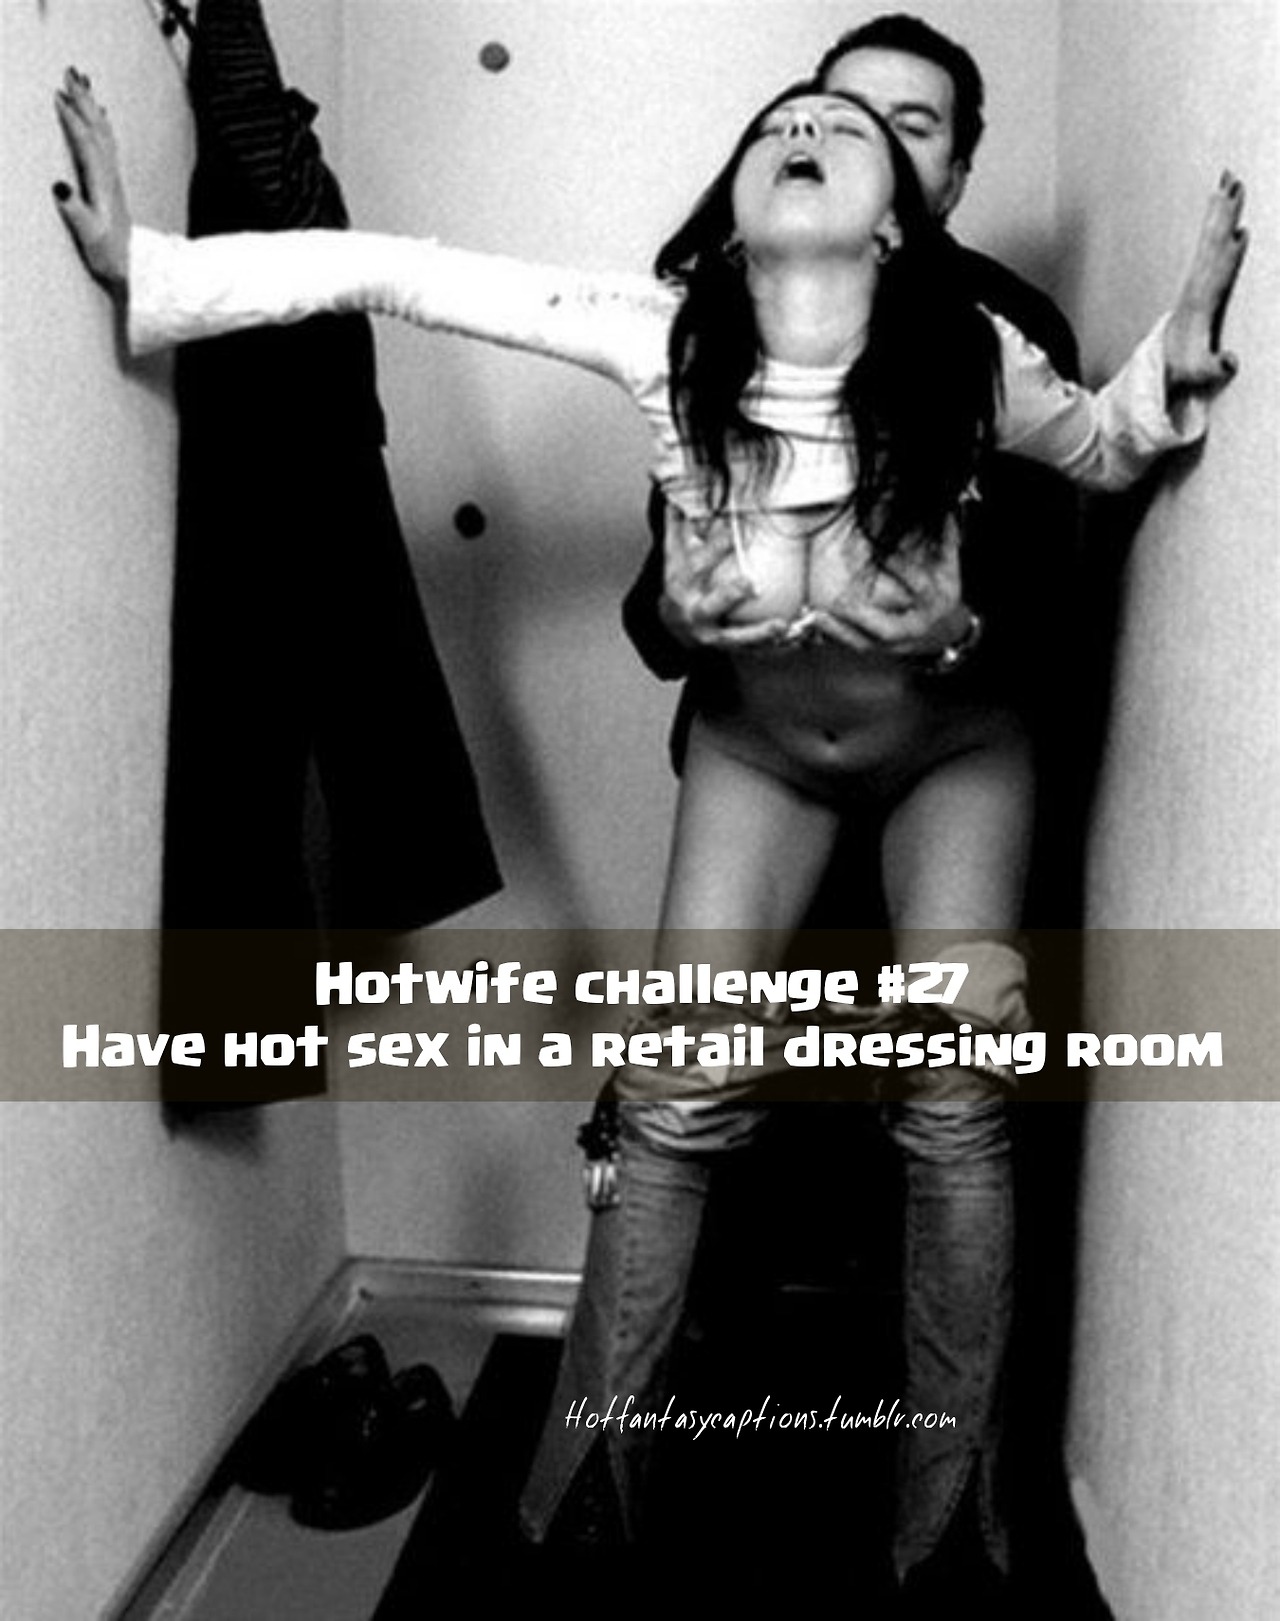 Hotwife challenge #27 - Have hot sex in a dressing room image